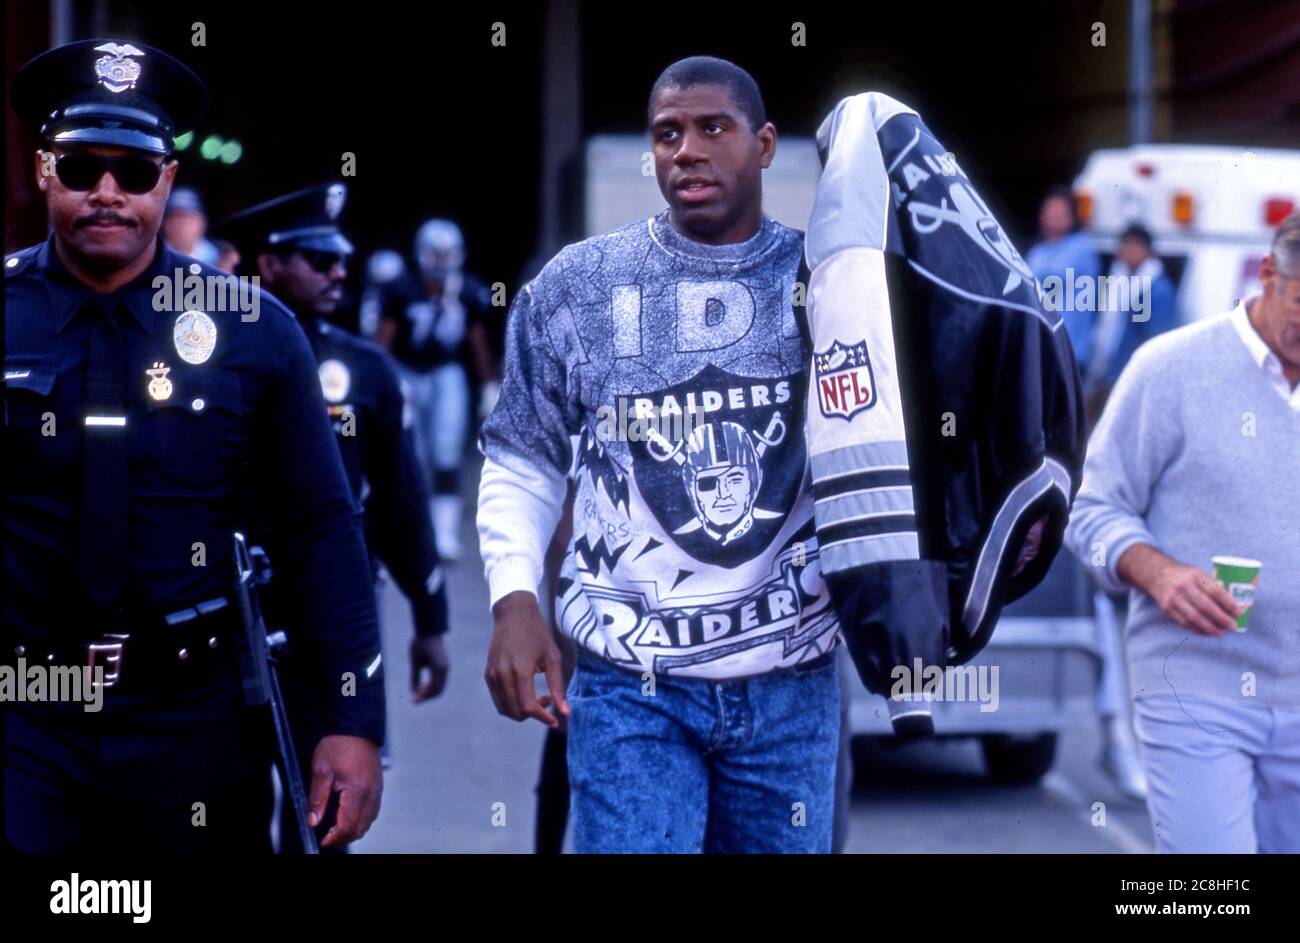 Magic Johnson of the Lakers arriving at the Los Angeles Coliseum dressed in Raiders gear to watch an L.A. Raiders NFL football game in 1991. Stock Photo